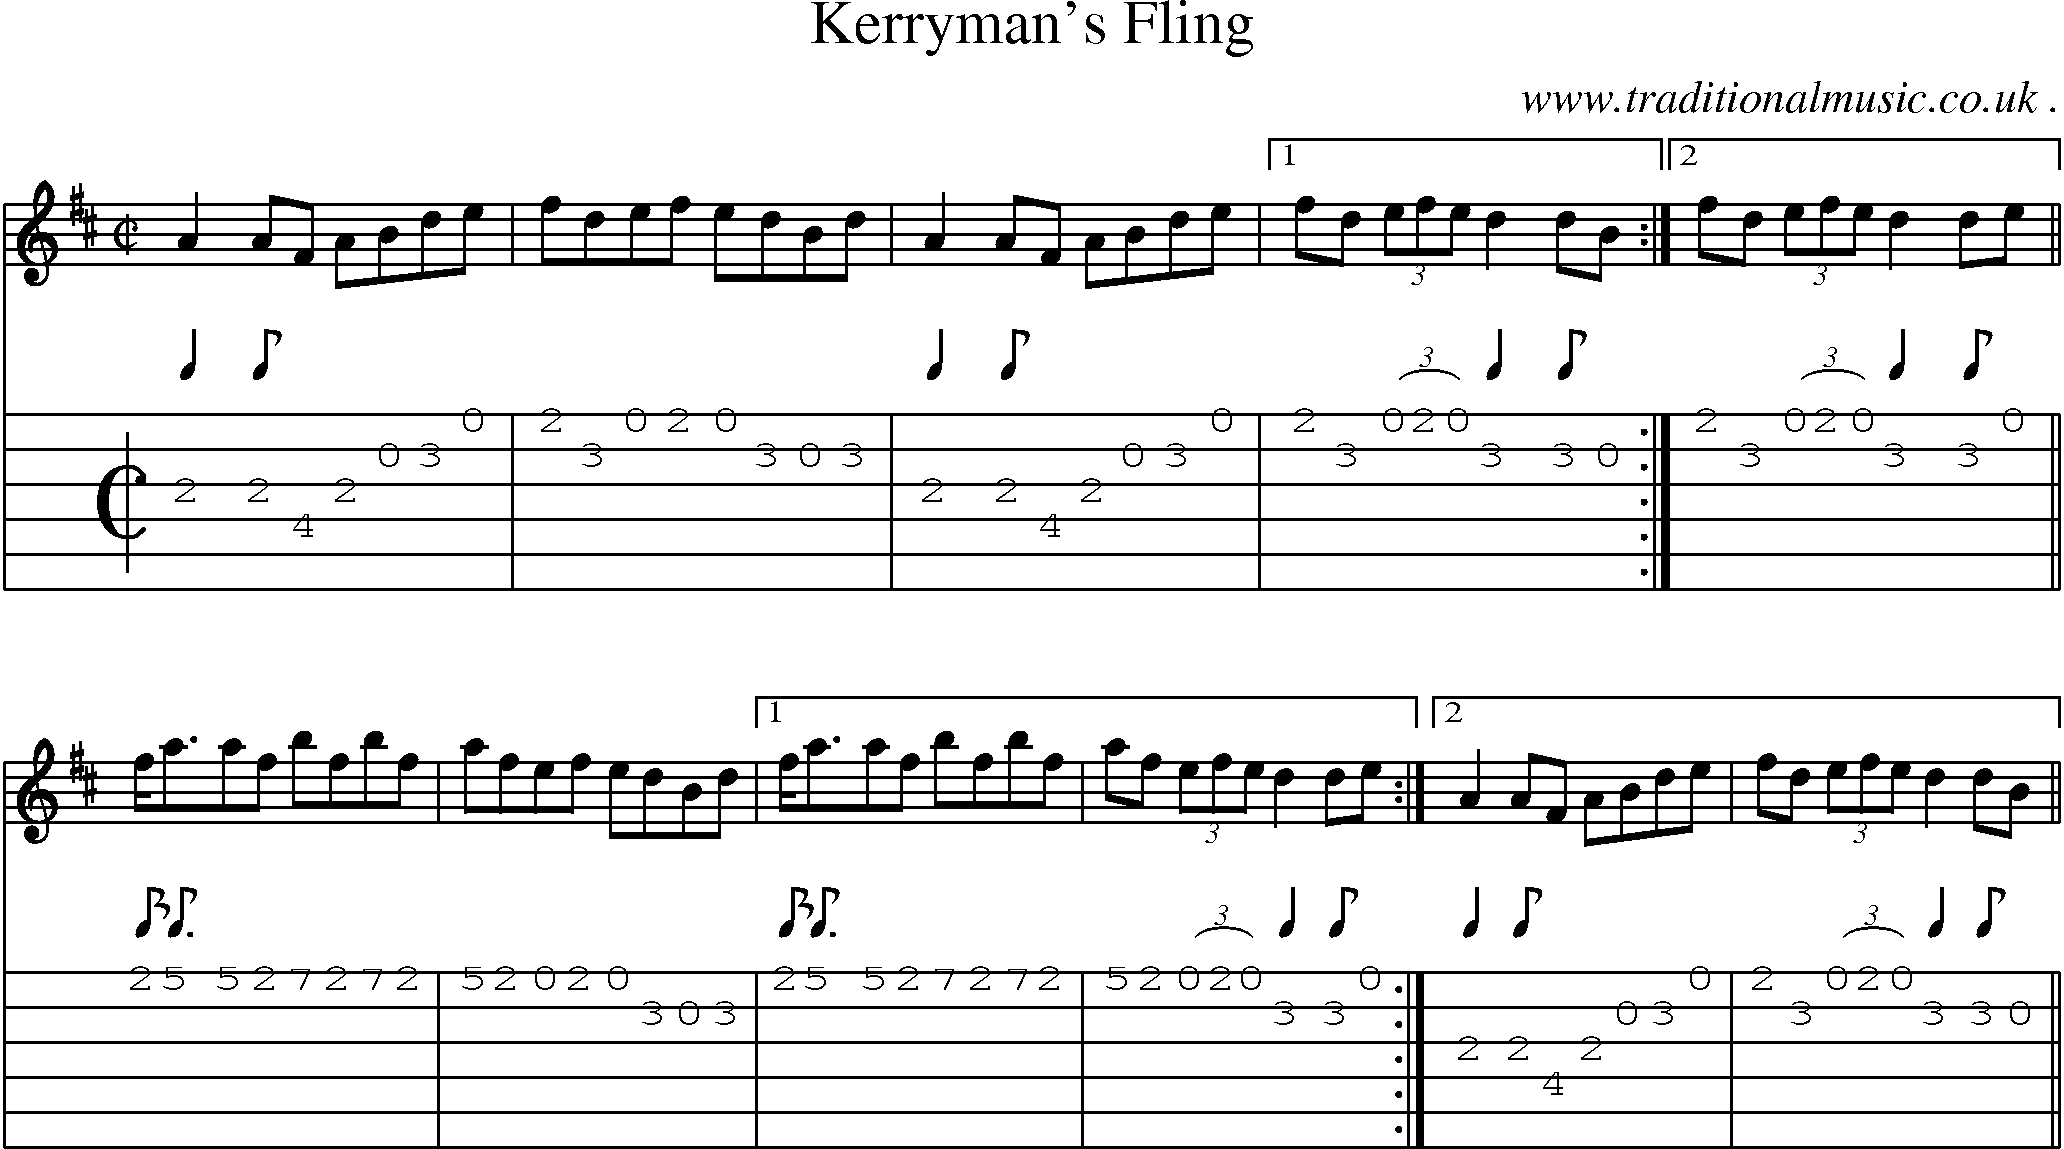 Sheet-Music and Guitar Tabs for Kerrymans Fling